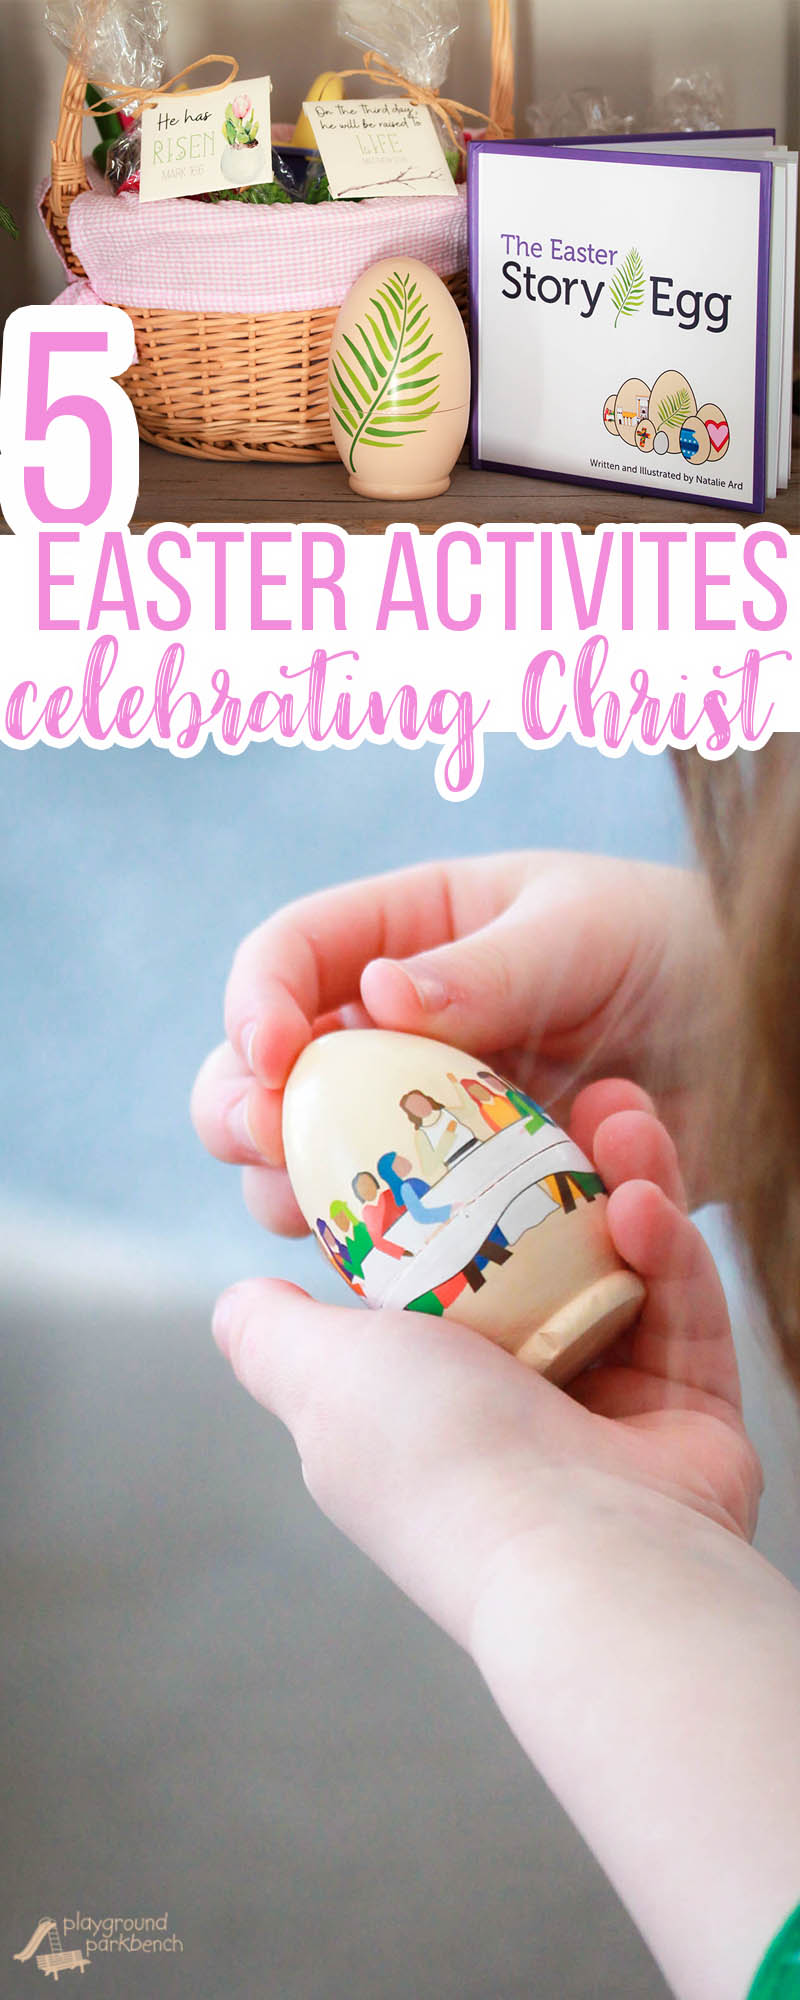 Celebrate the meaning of the season with these 5 activities to share the Easter Story for Kids. Tell the story of Christ's journey during Holy Week, his death and resurrection and why we celebrate the founding of our faith each Easter | Kids Activities | Crafts for Kids | Christian Families | Children's Books |